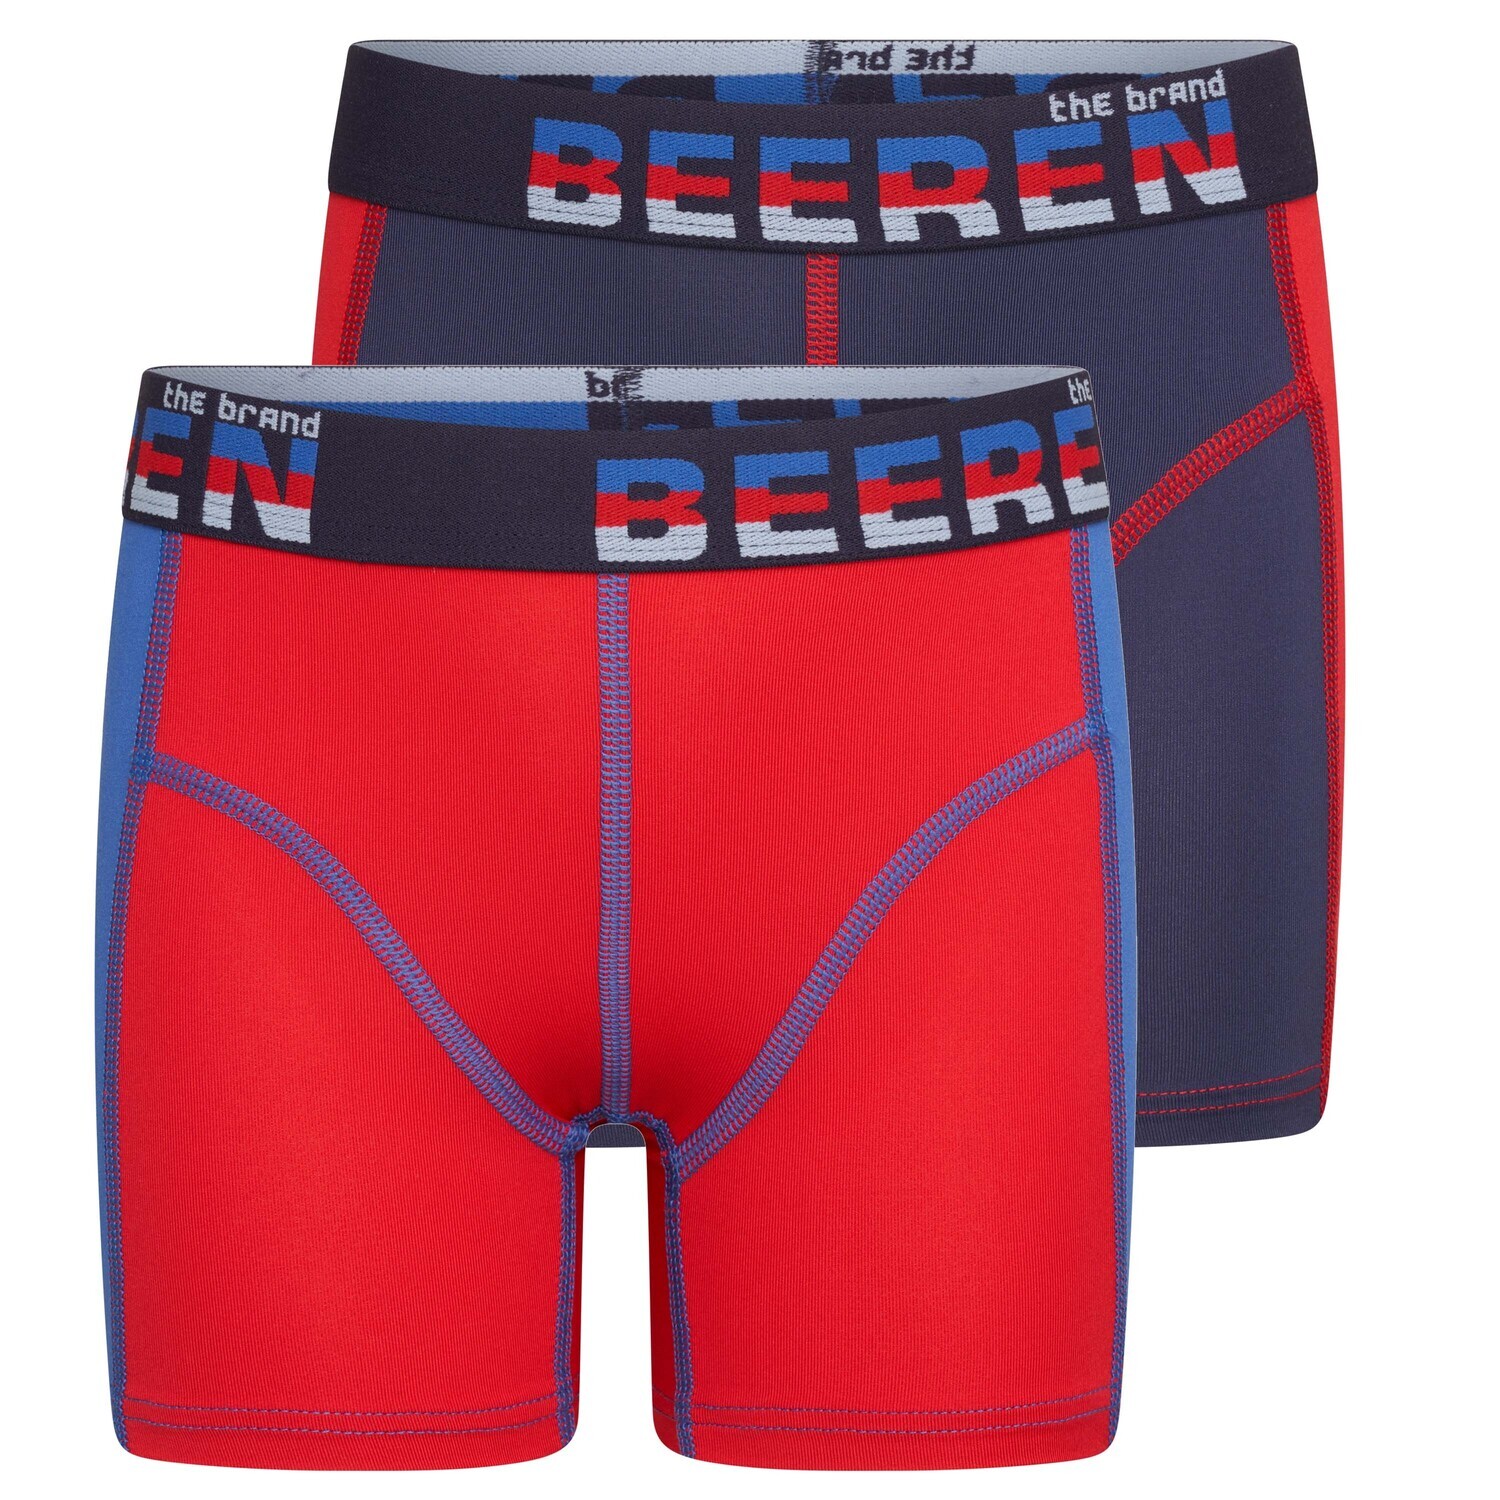 (19-750) Jongens boxershort Mix and Match 2-Pack rood/donkerblauw 122/128